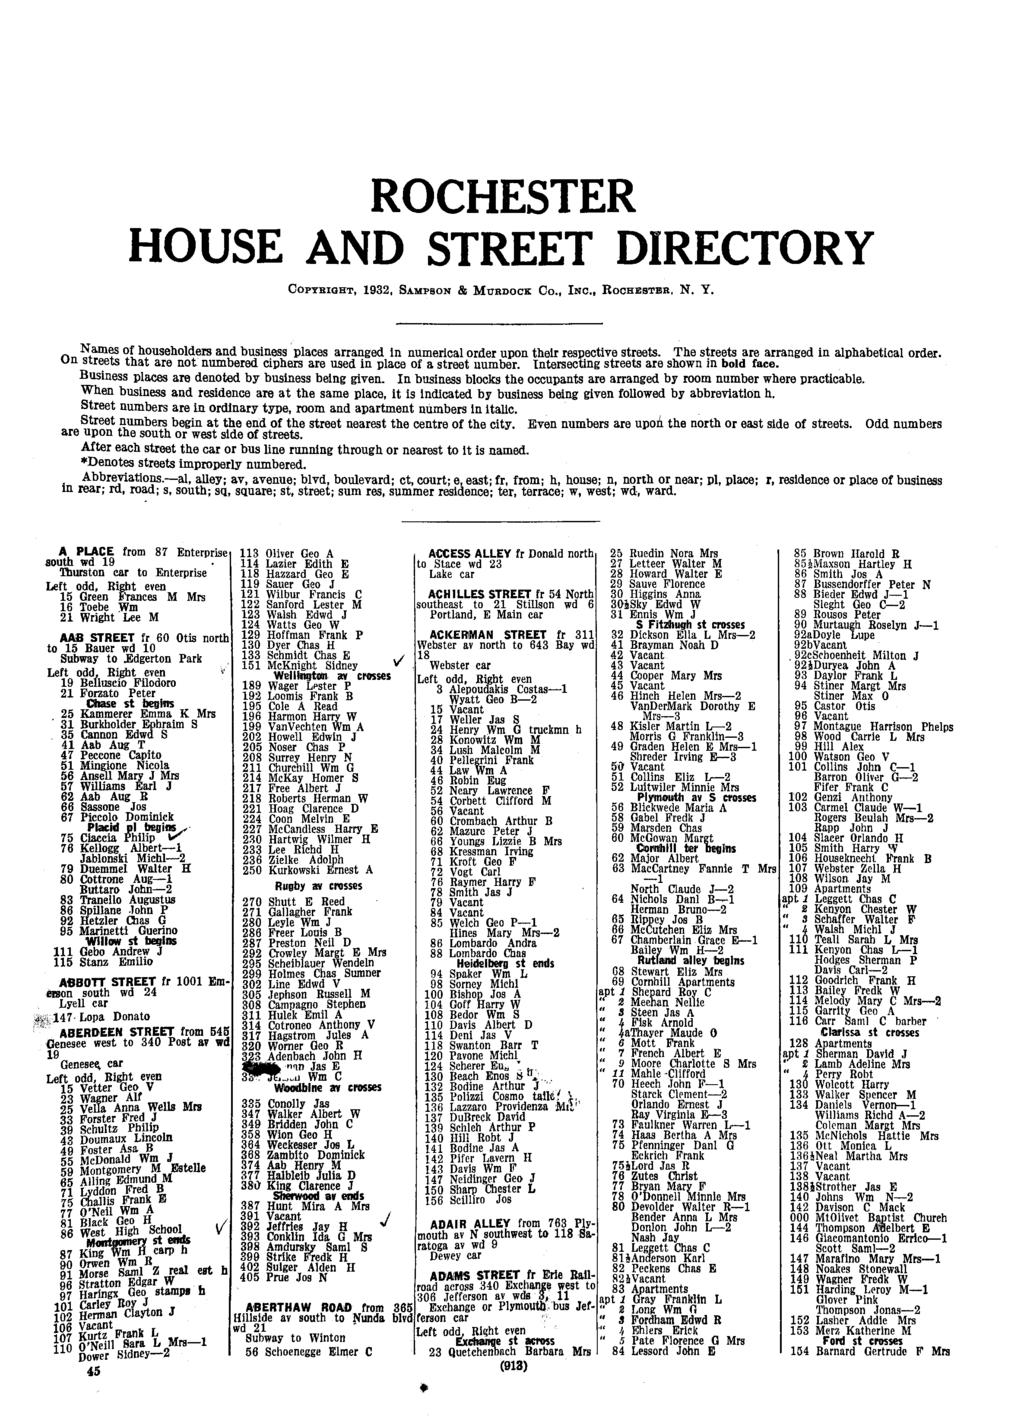 Central Library of Rocester and Monroe County - City Directory Collection - 933 ROCHESTER HOUSE AND STREET DIRECTORY Copybigt 932 Sampson & Mukdock Co. Inc. Roobsteb N. Y.